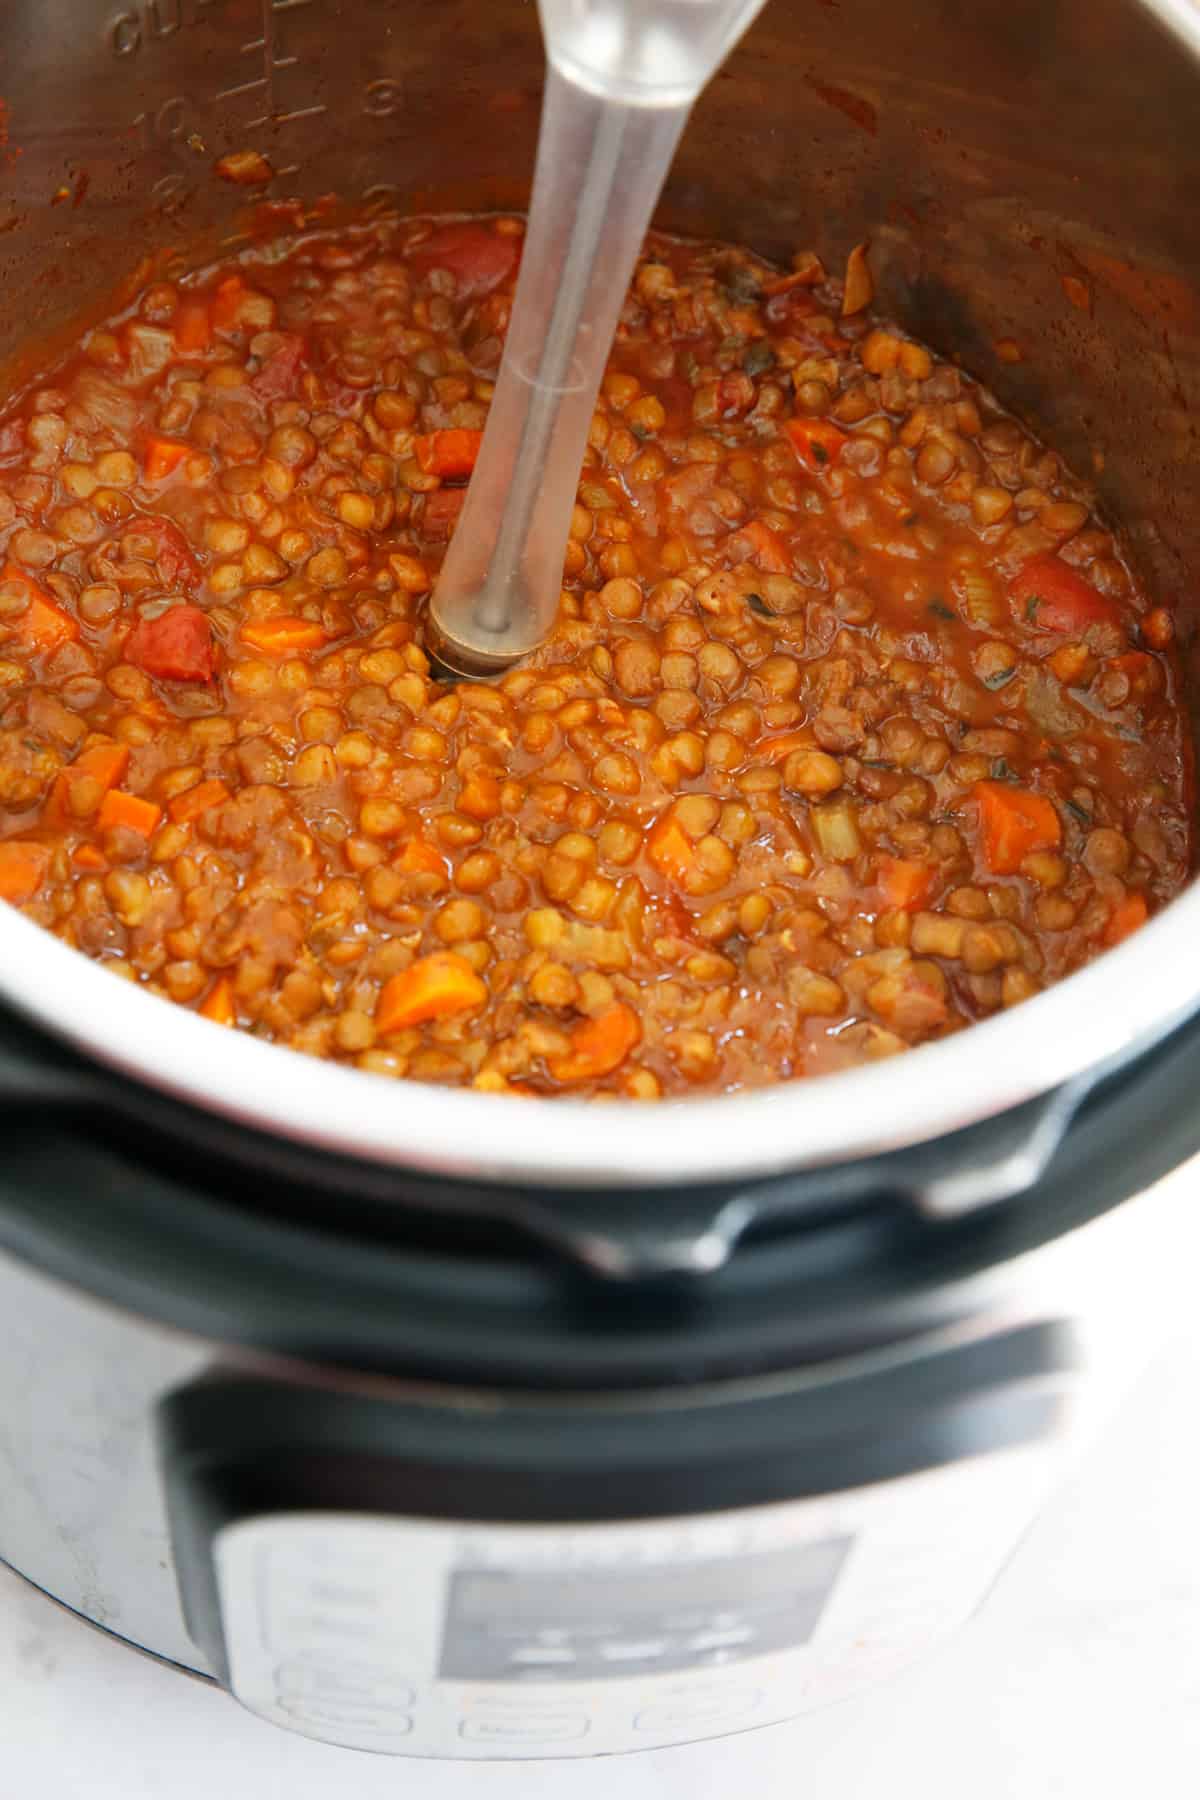 Instant pot lentil soup being partially pureed with a hand blender